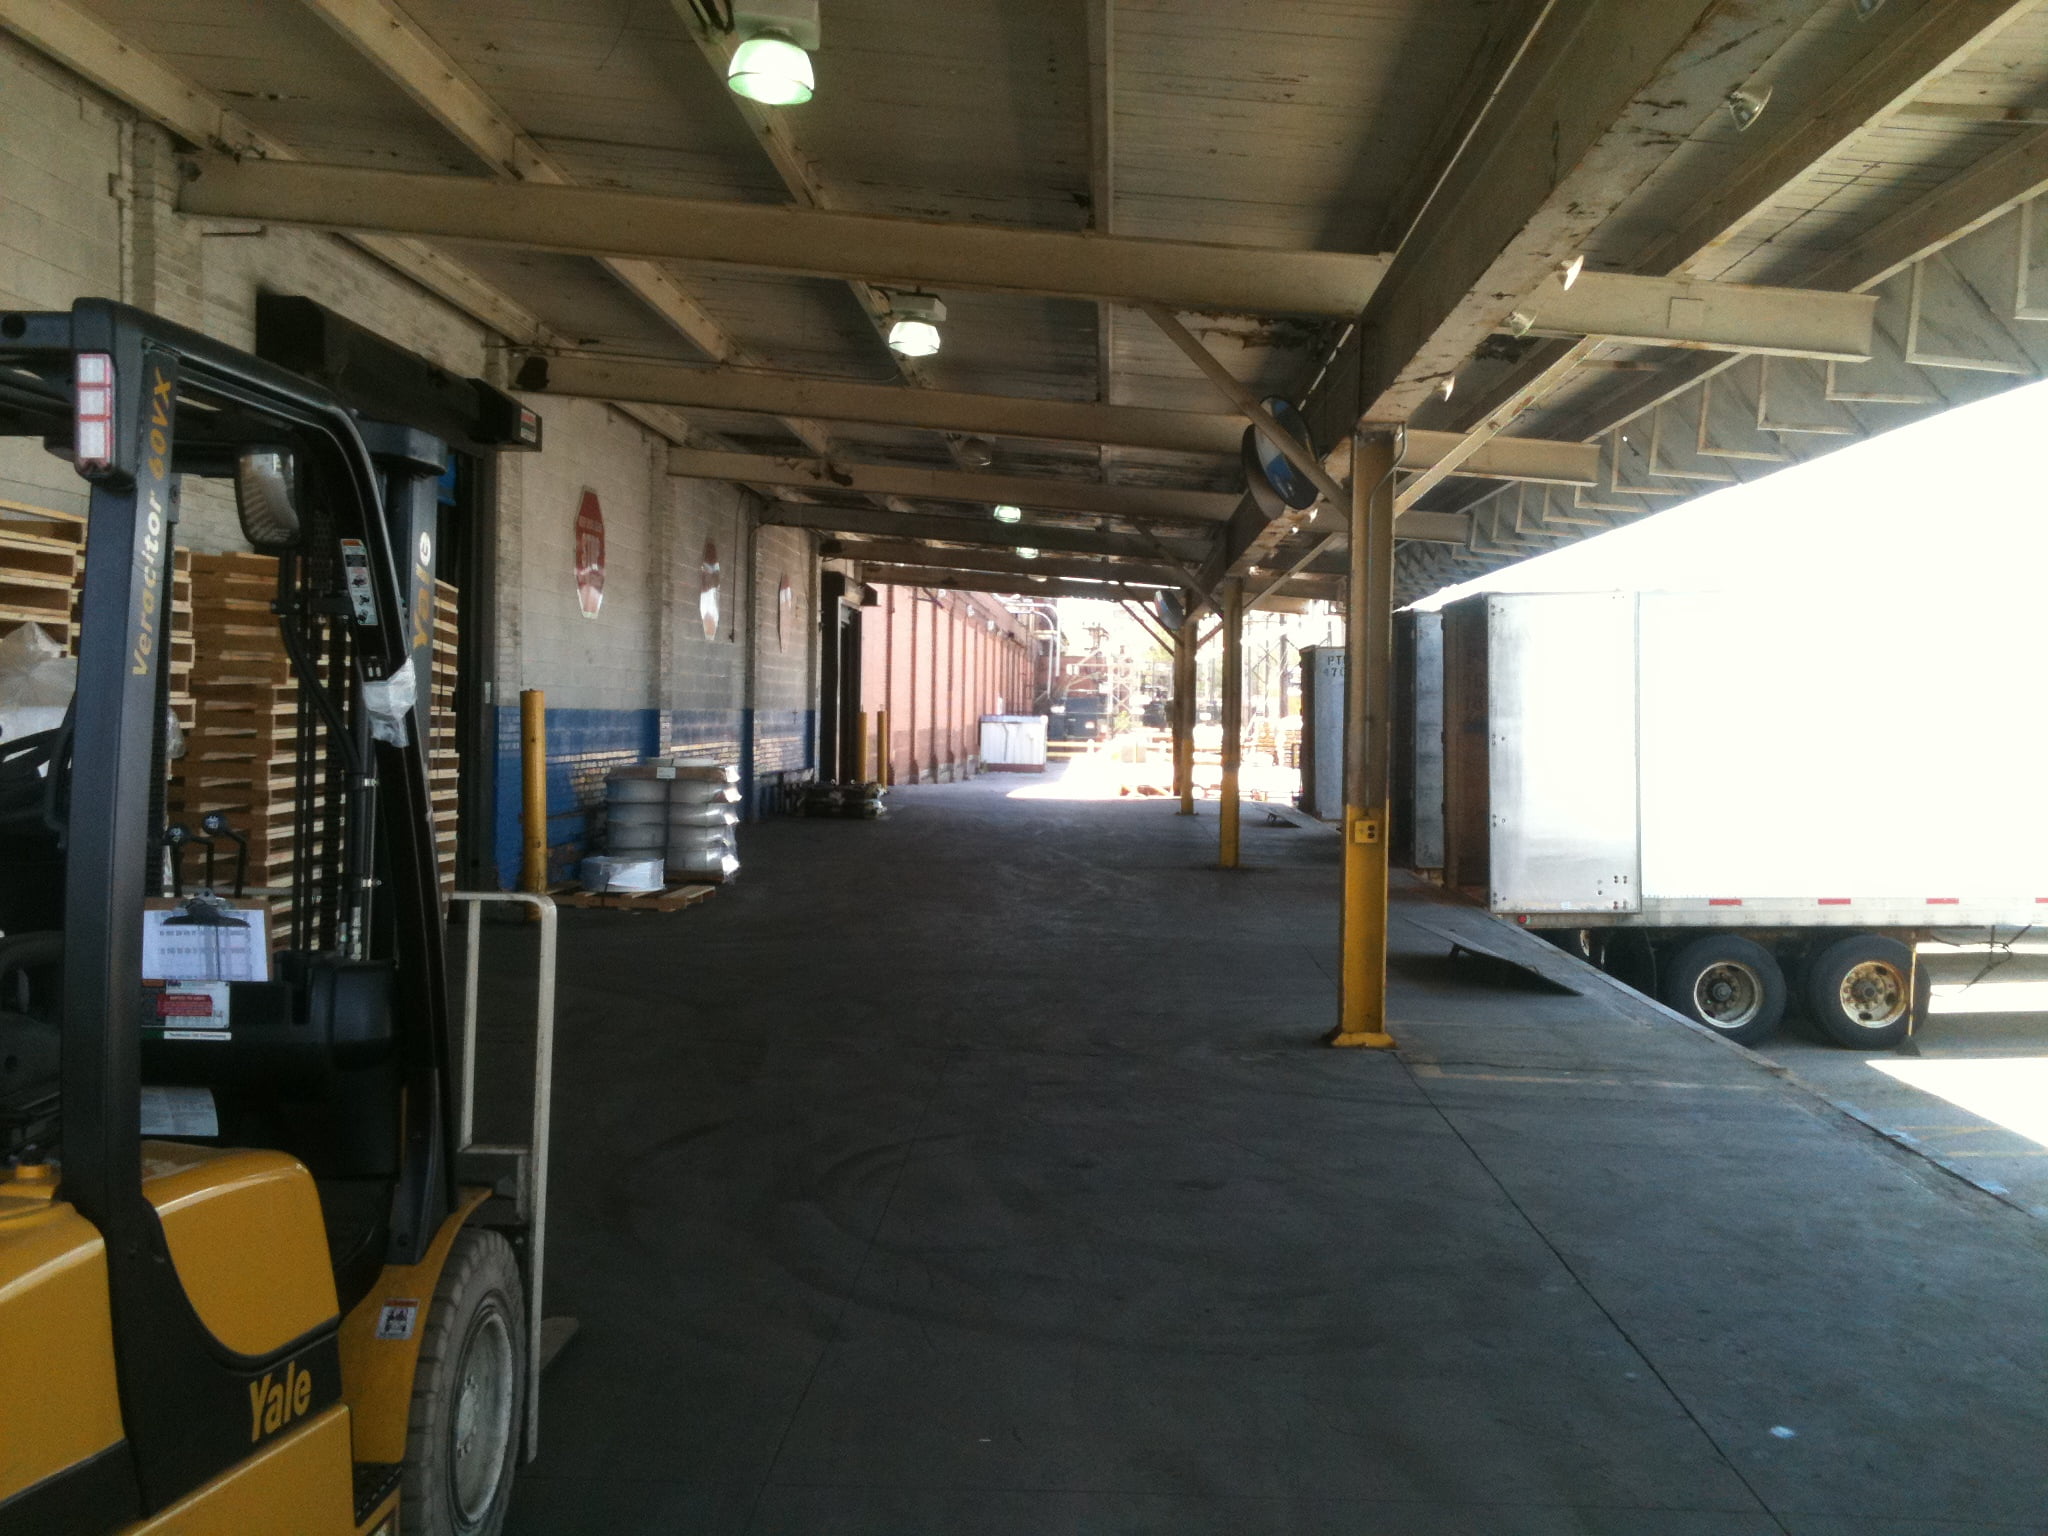 Loading Dock Before Asile Stripping And Textured Paint To Prevent Slipping And Images